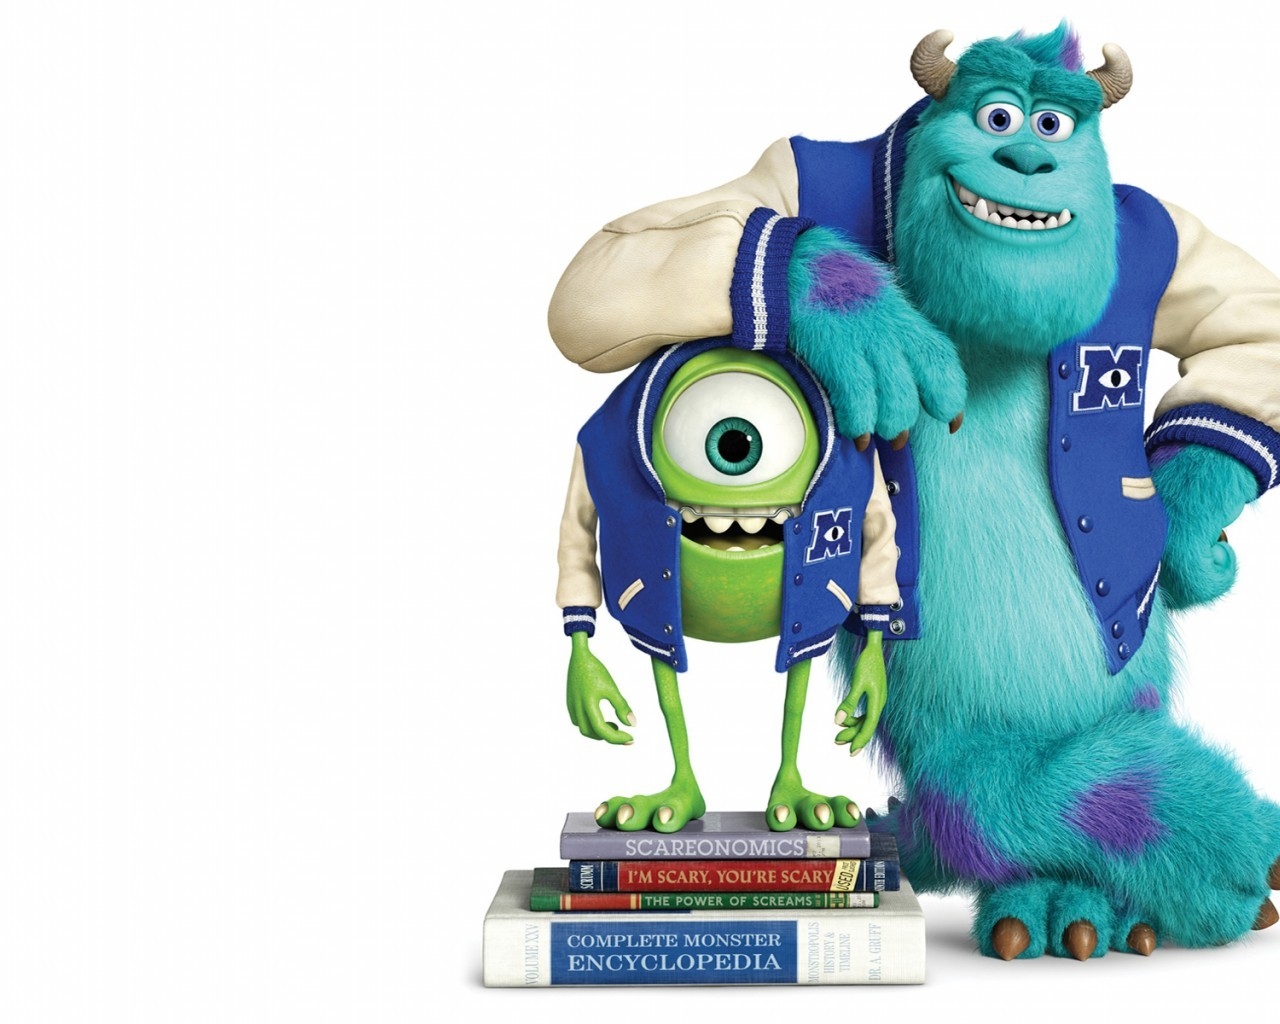 2013 Monsters University for 1280 x 1024 resolution